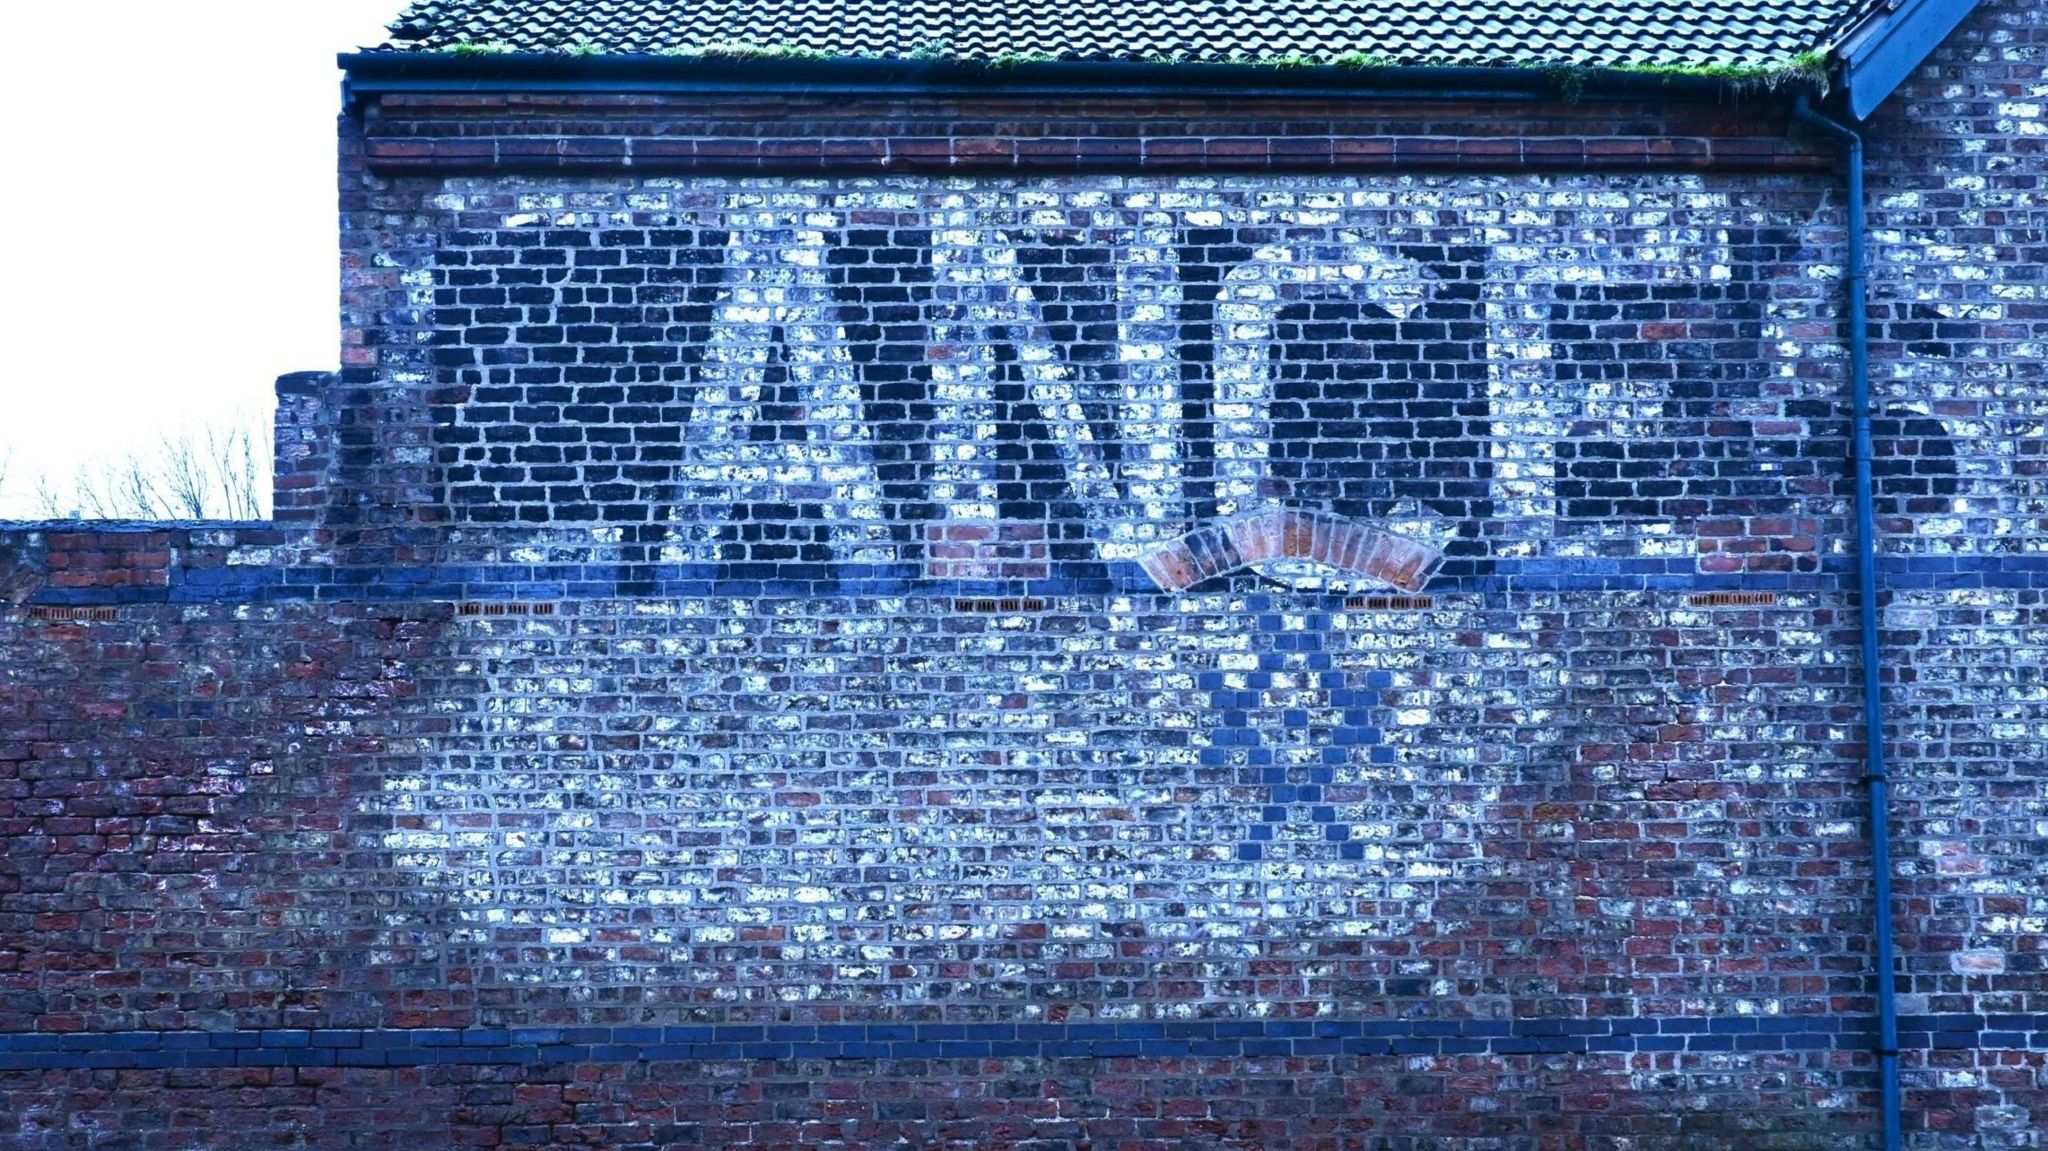 Brick wall that says Lance in white letters